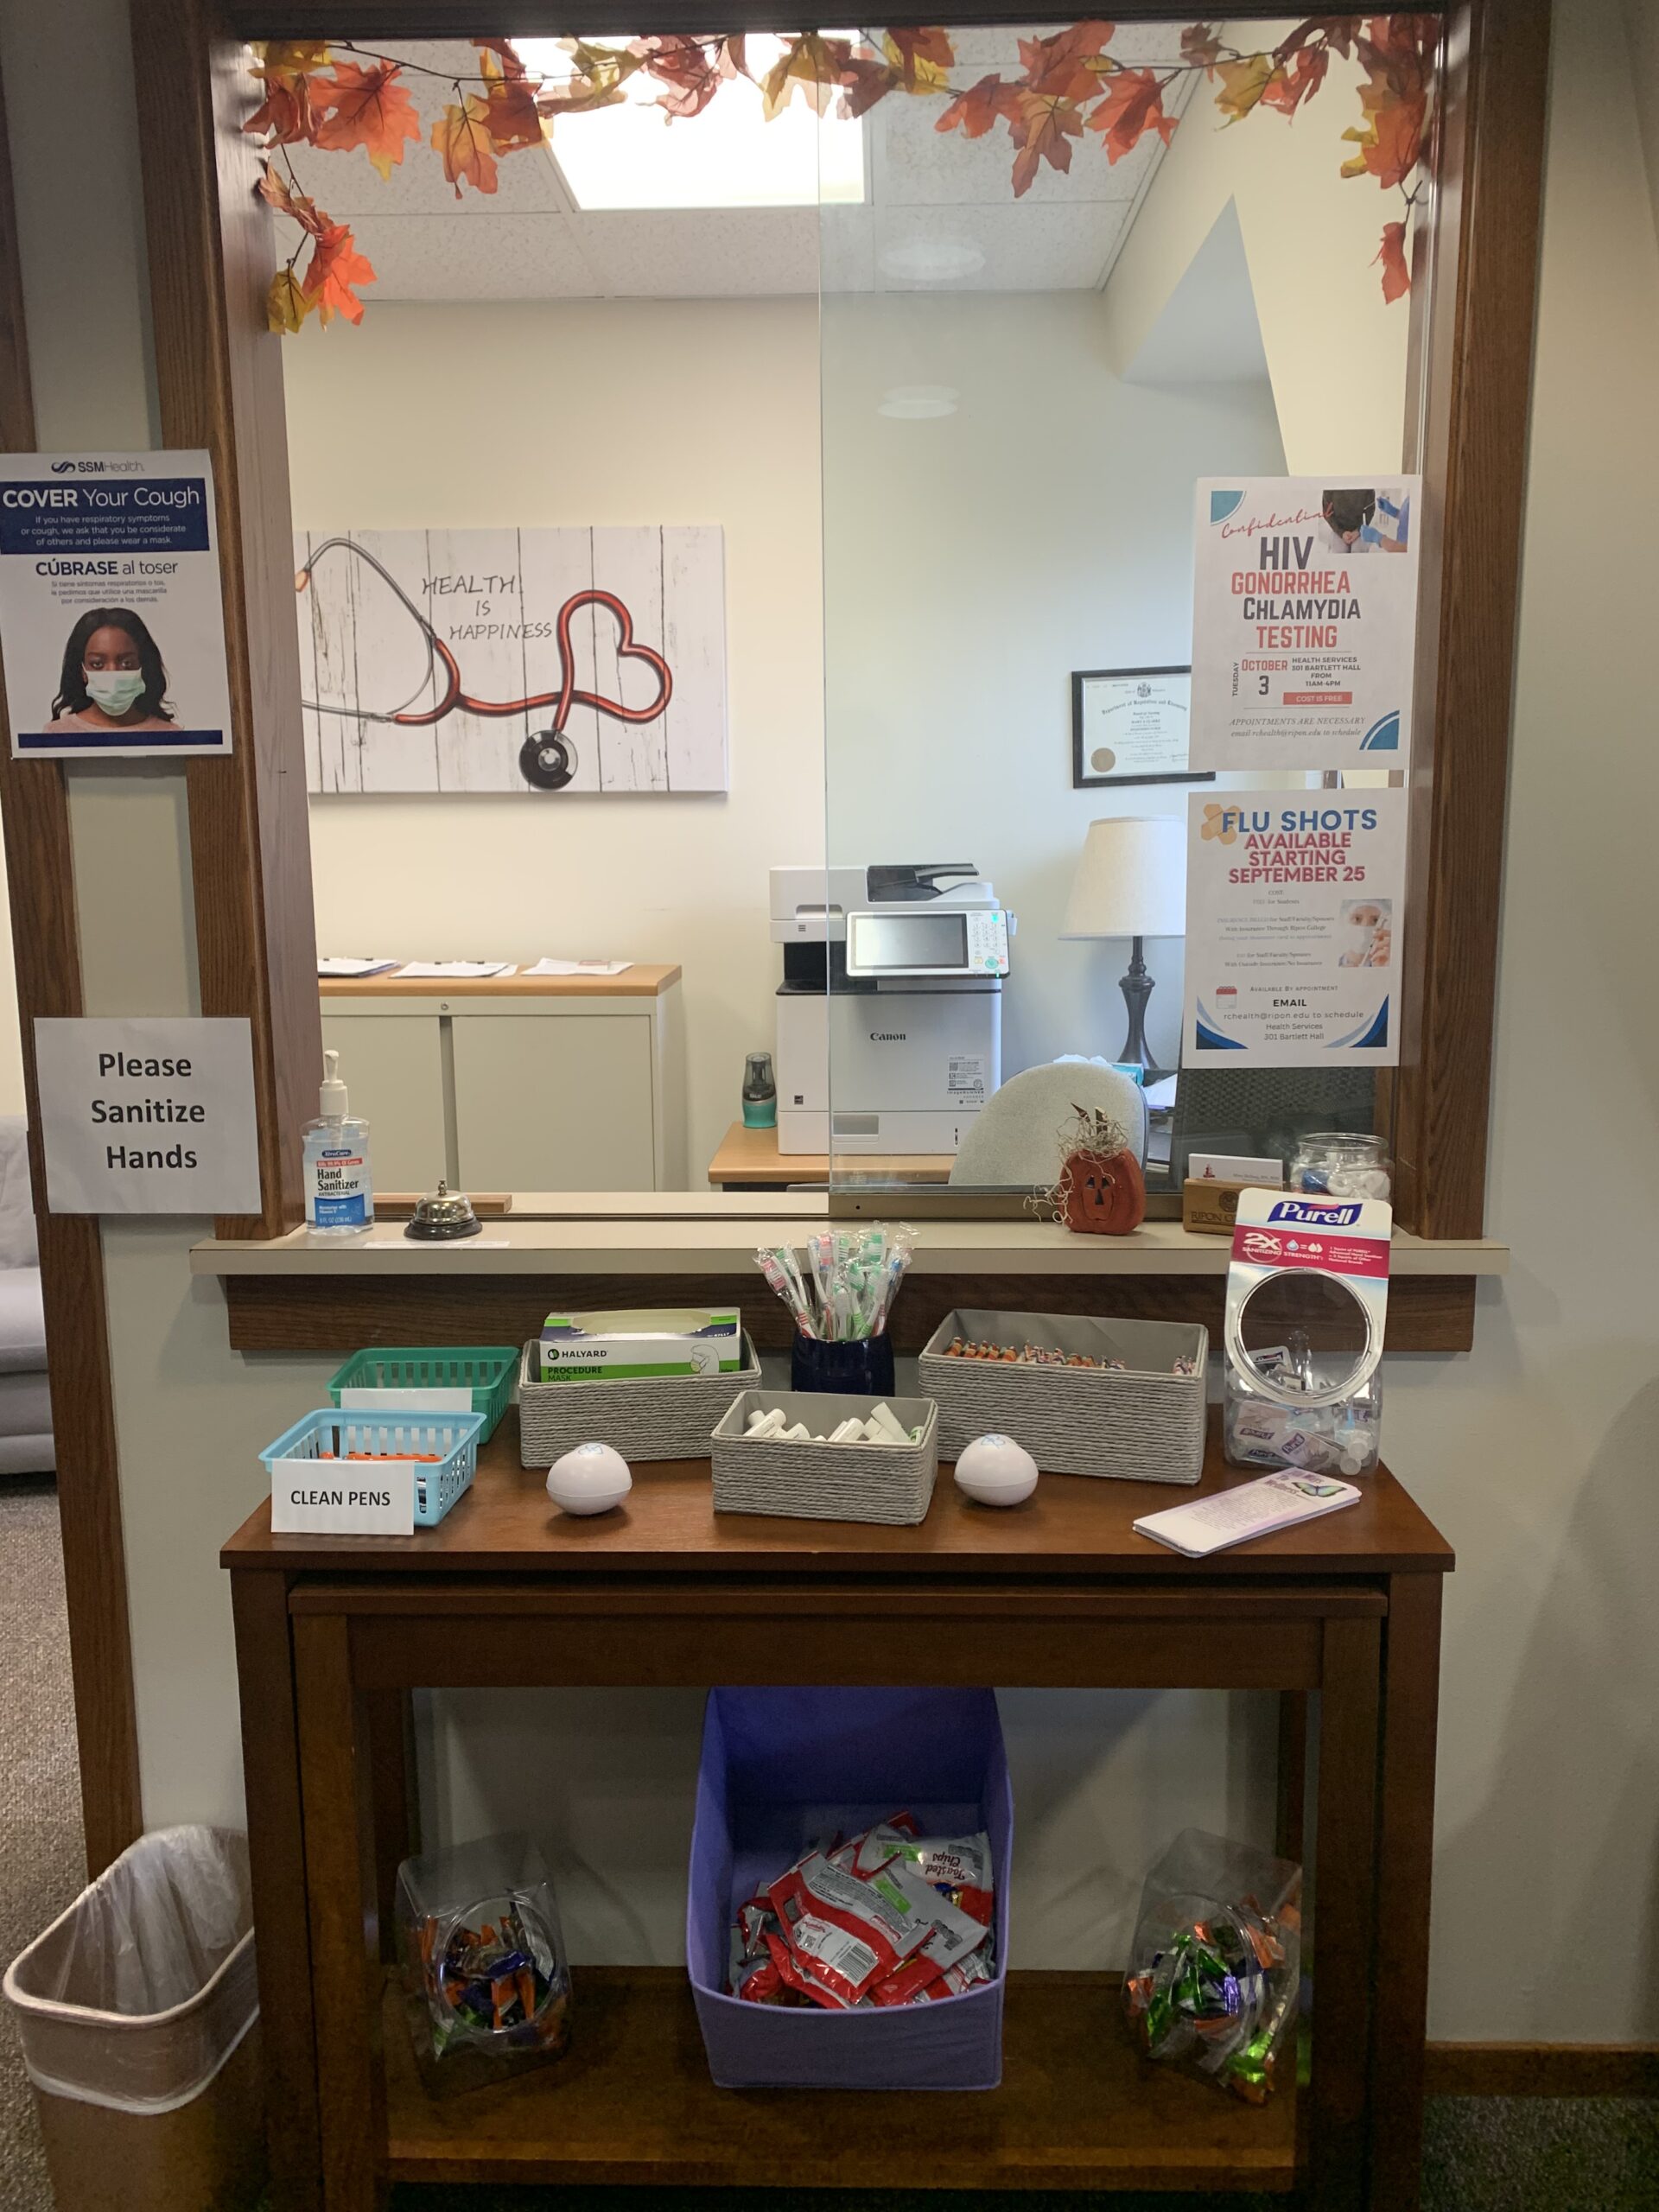 A table in Health Services holds toothbrushes, hand sanitizer, masks, snacks, and more! Photo courtesy of Gwen Frei.